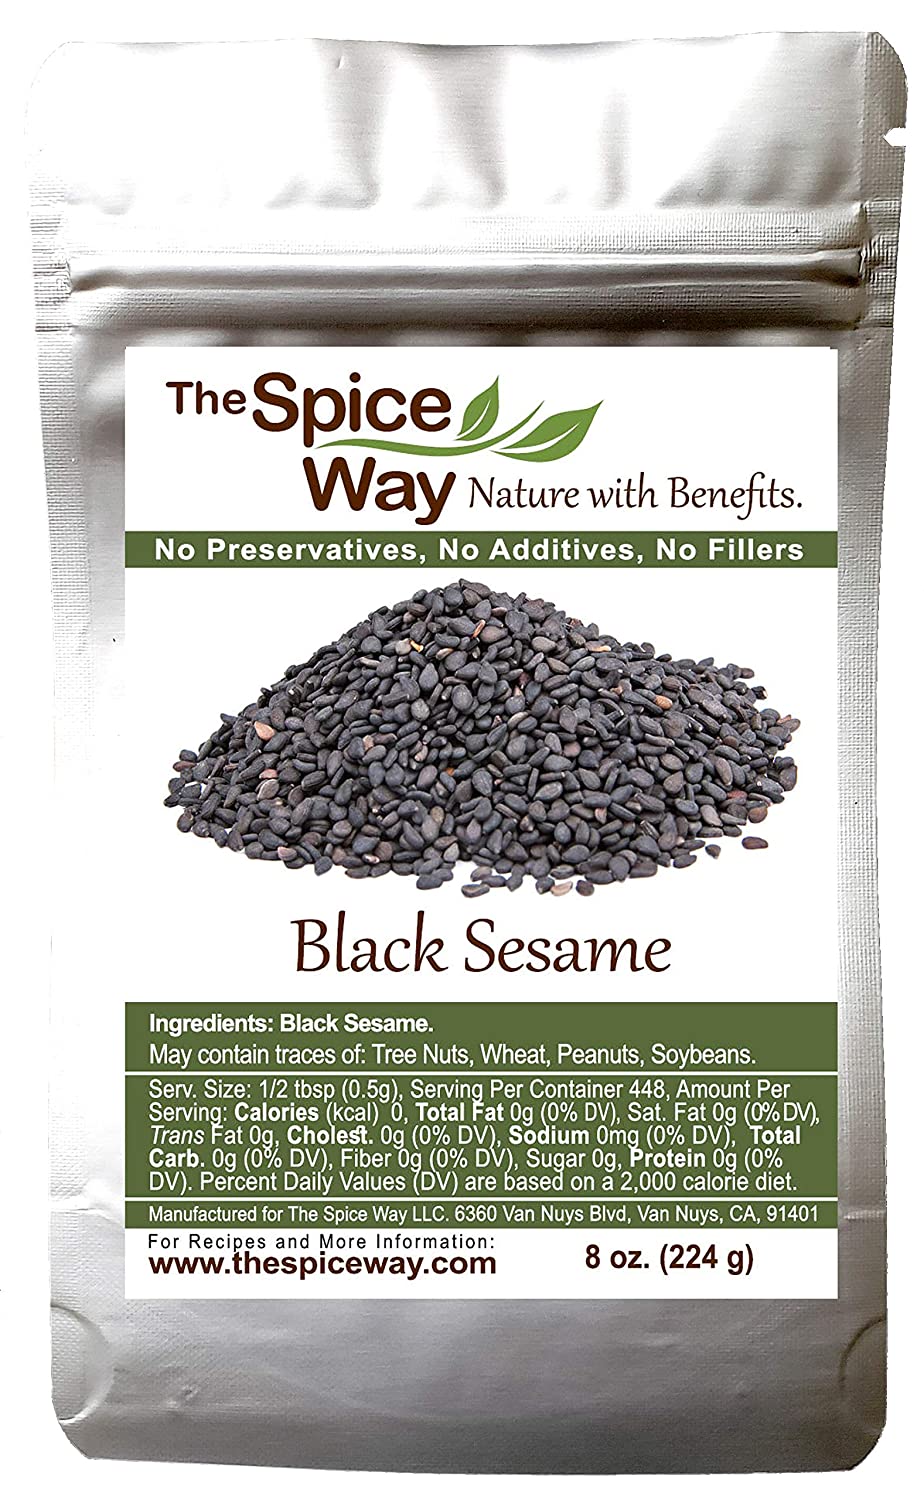 Black sesame seeds as a possible substitute for adzuki beans